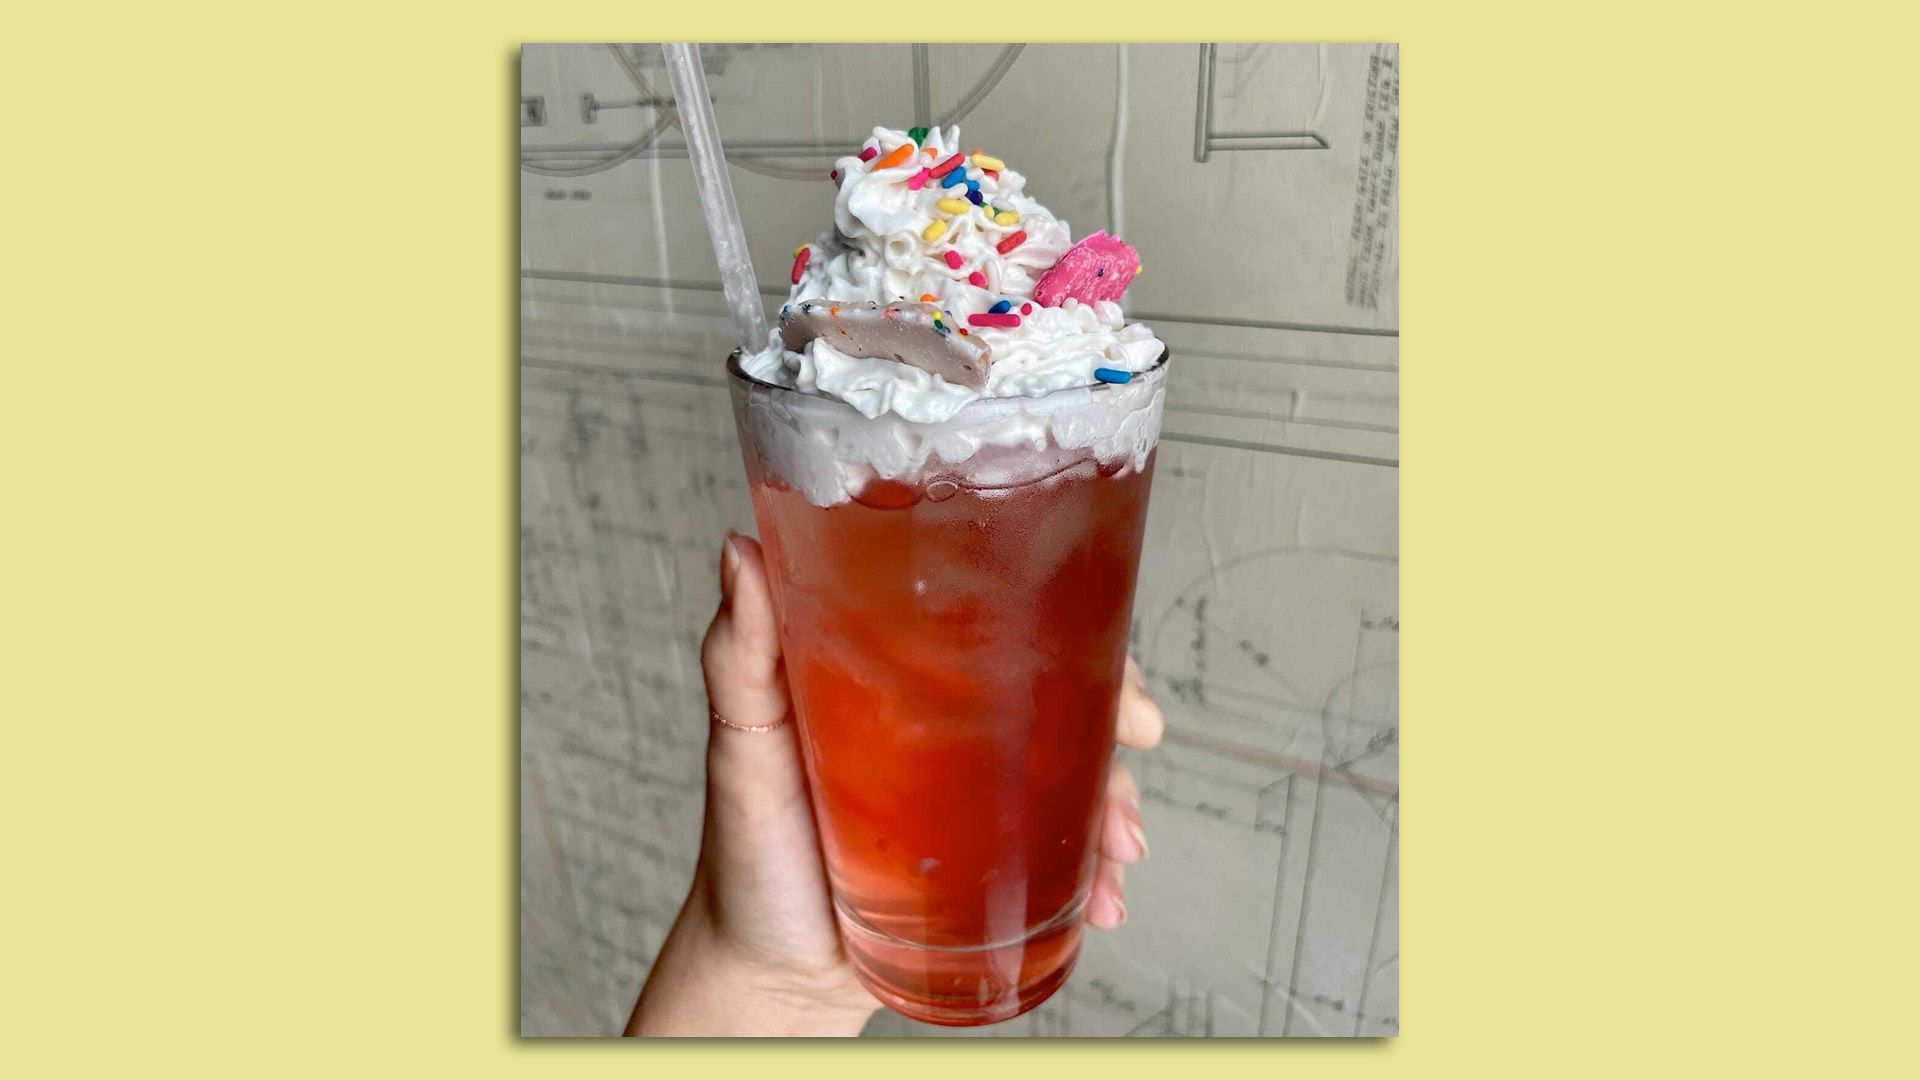 A hand holds up a red cocktail topped with whipped cream and animal crackers.